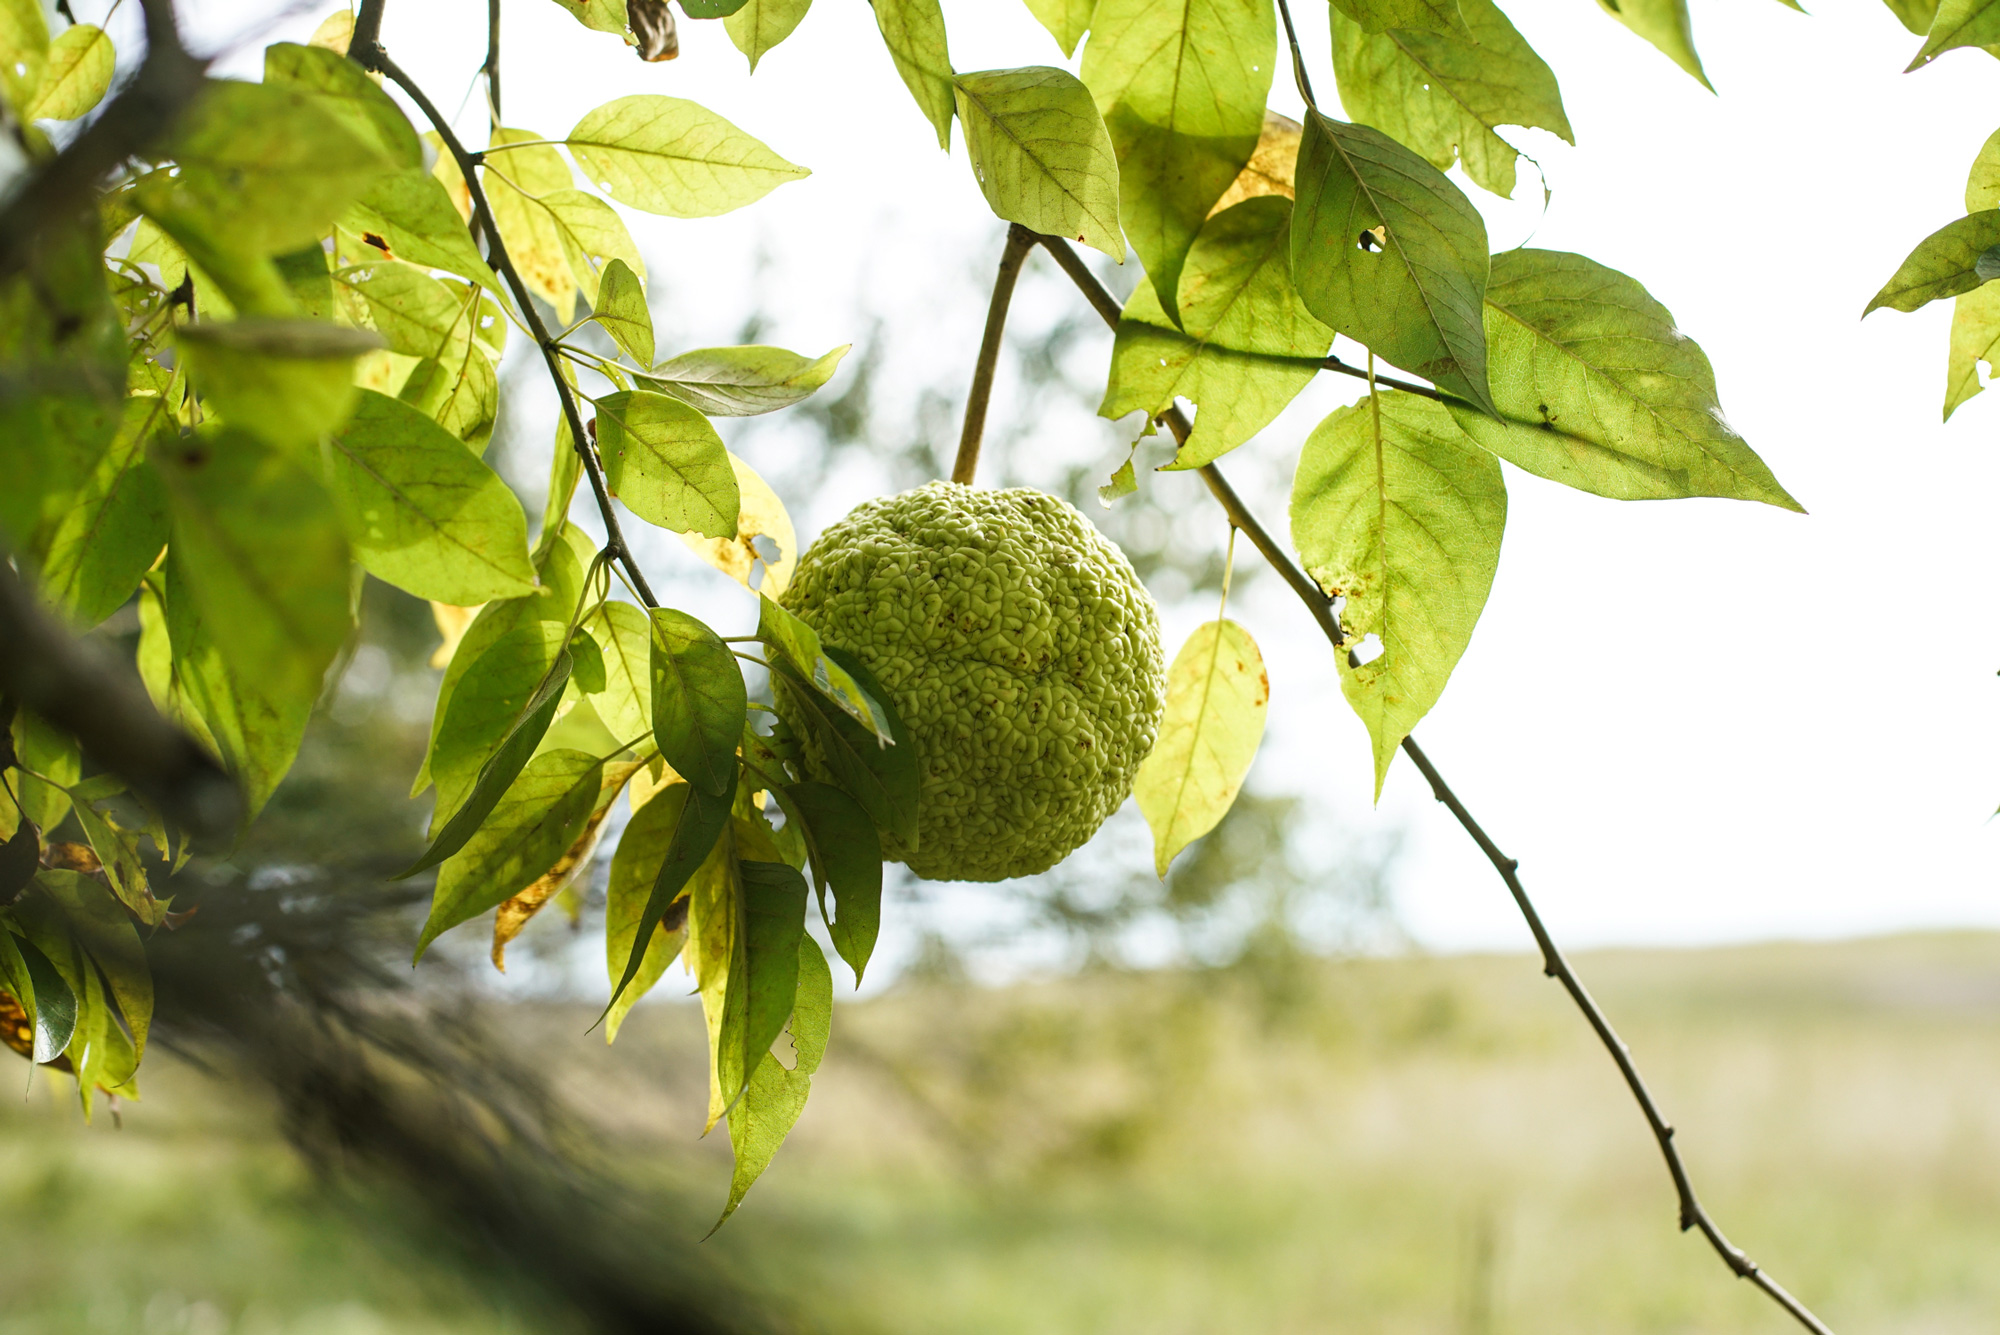 An Osage orange hanging from a branch.